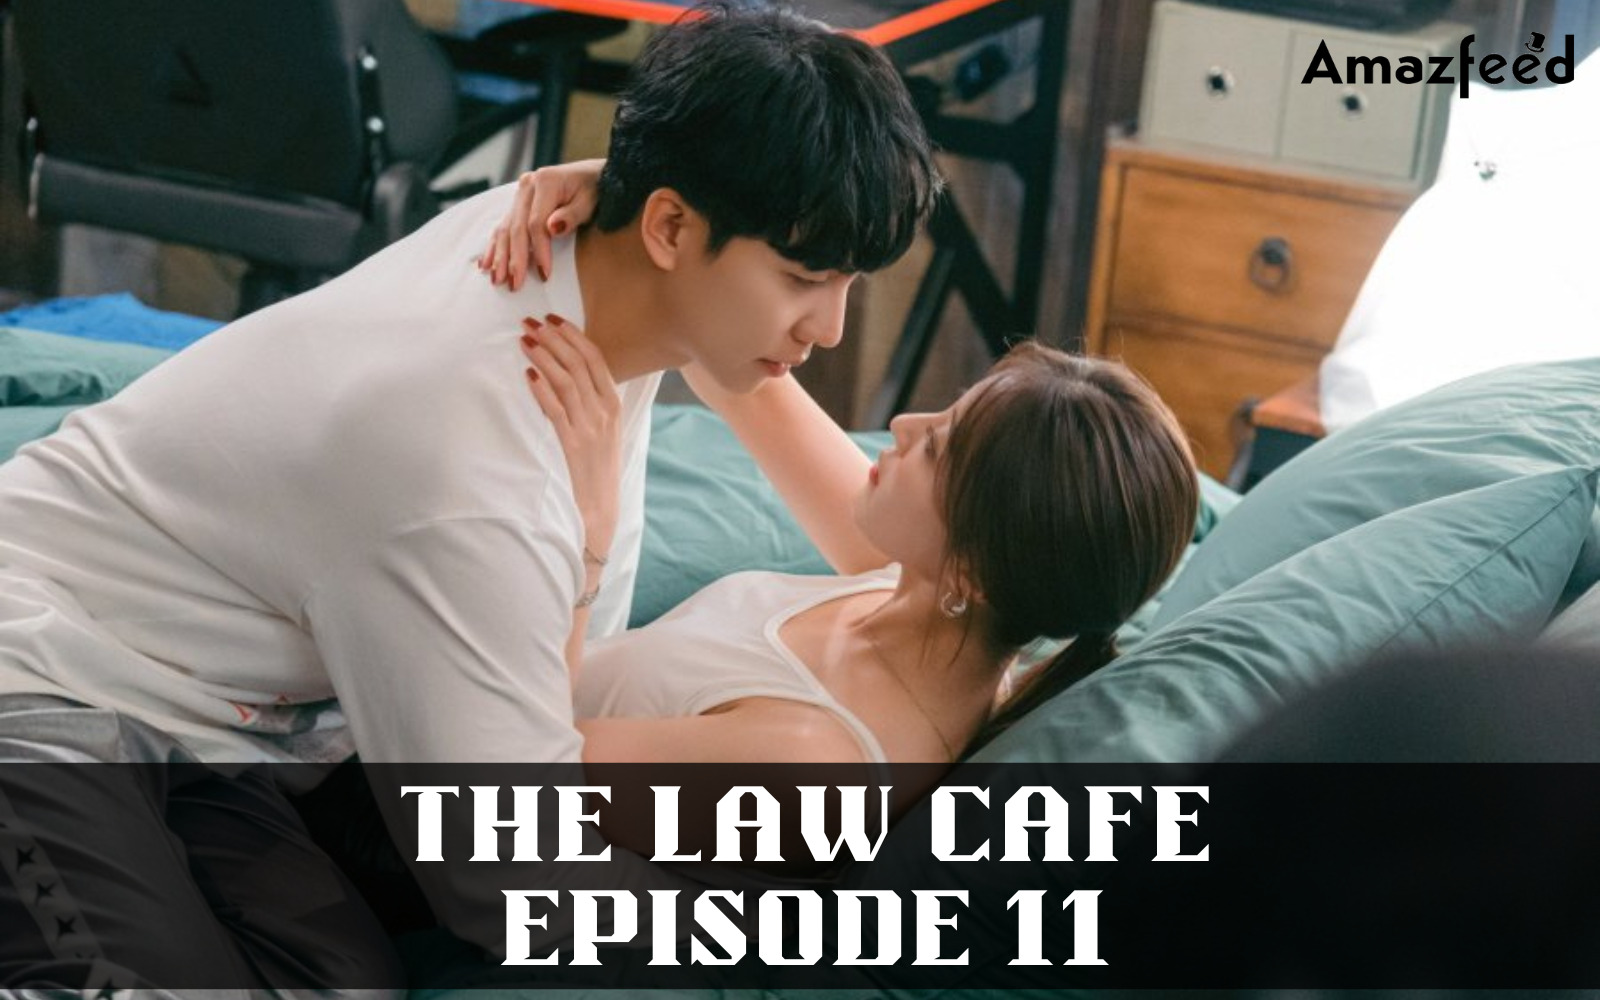 The Law Cafe Episode 11 Premiere Time in different time zones